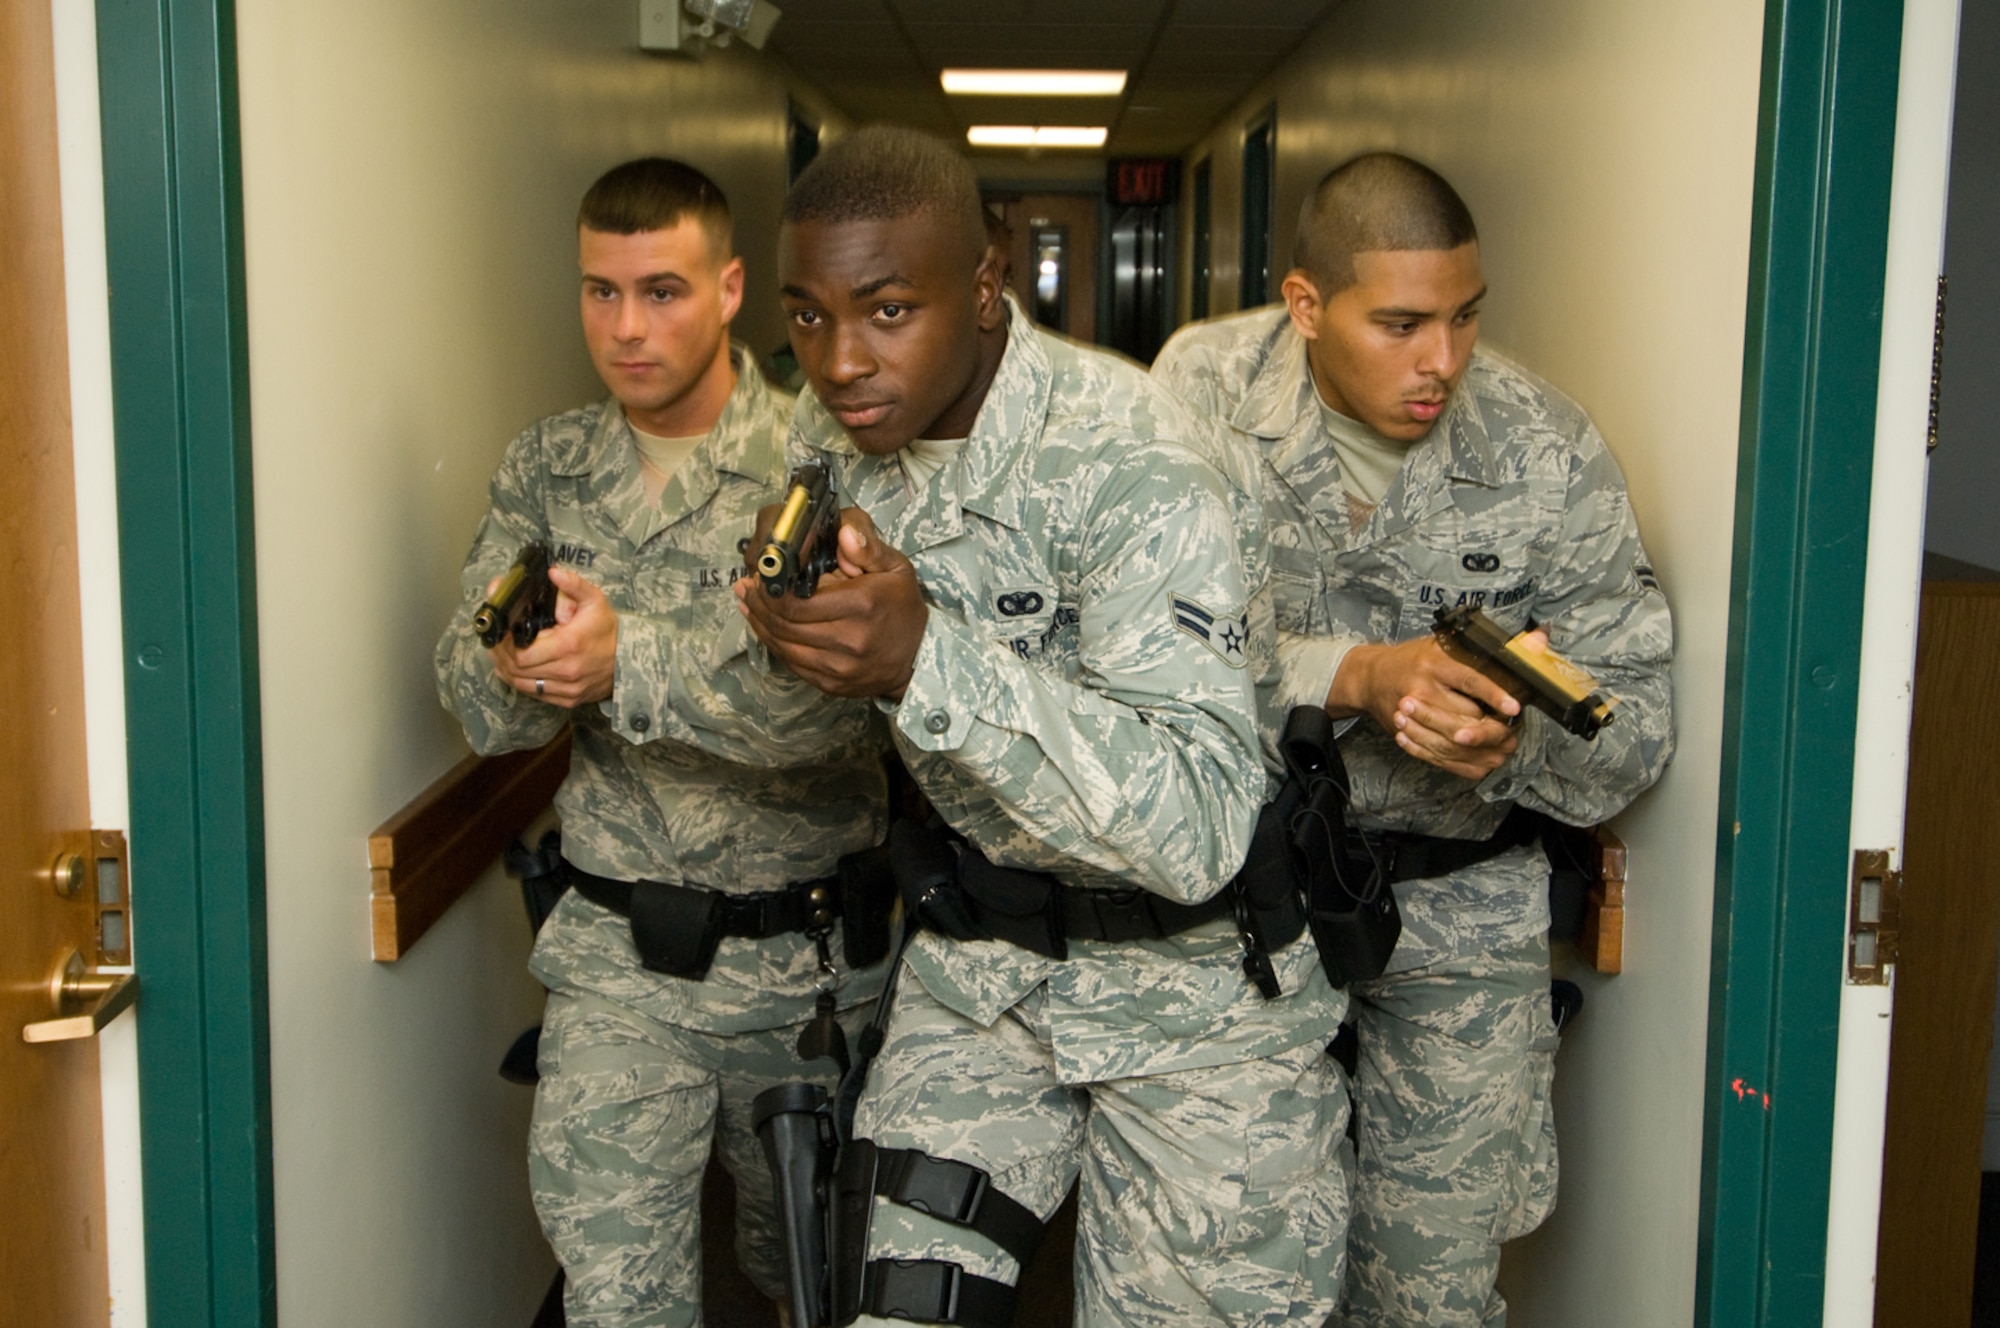 HANSCOM AIR FORCE BASE, Mass. - (From Left) Airman 1st Class Jeffrey Lavey, Airman 1st Class Nicholas Taylor, and Airman 1st Class Abraham Medina, with Staff Sgt. Christopher Darrow (not pictured, in rear), all with the 66th Security Forces Squadron, move along the corridors of the dormitories on Aug. 6 during a training session with the Massachusetts State Police Special Tactical Operations Team where they learned how to diffuse an active-shooter scenario. (U.S. Air Force photo by Rick Berry)